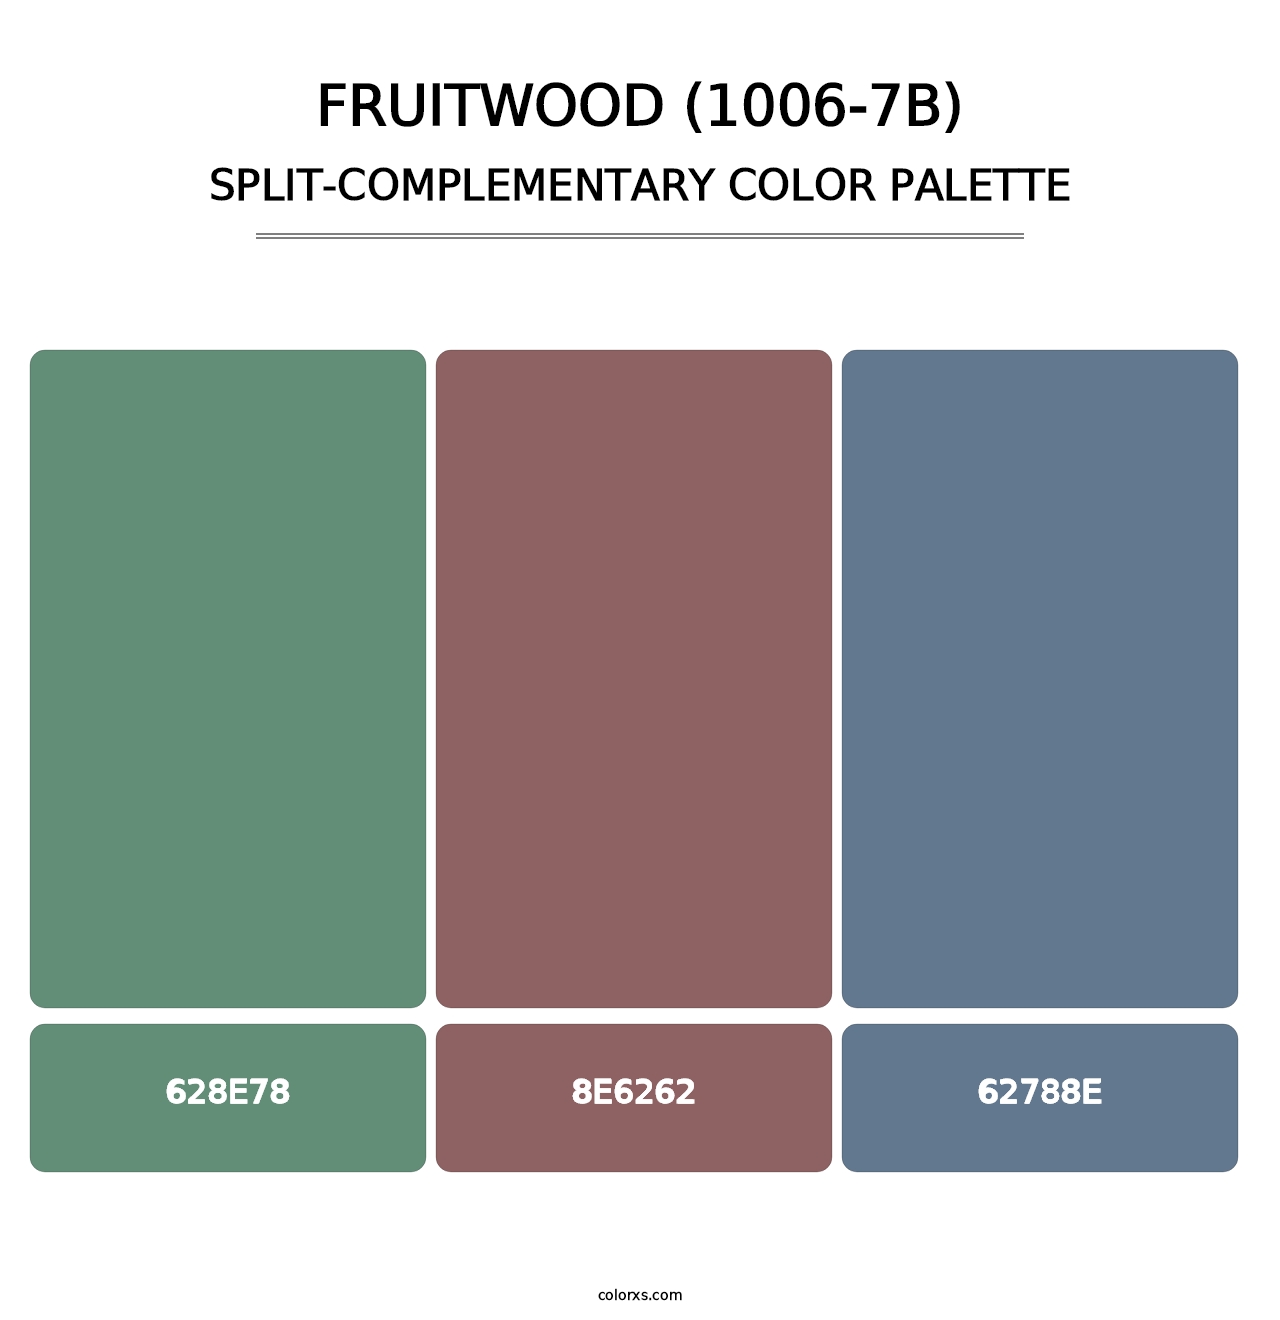 Fruitwood (1006-7B) - Split-Complementary Color Palette